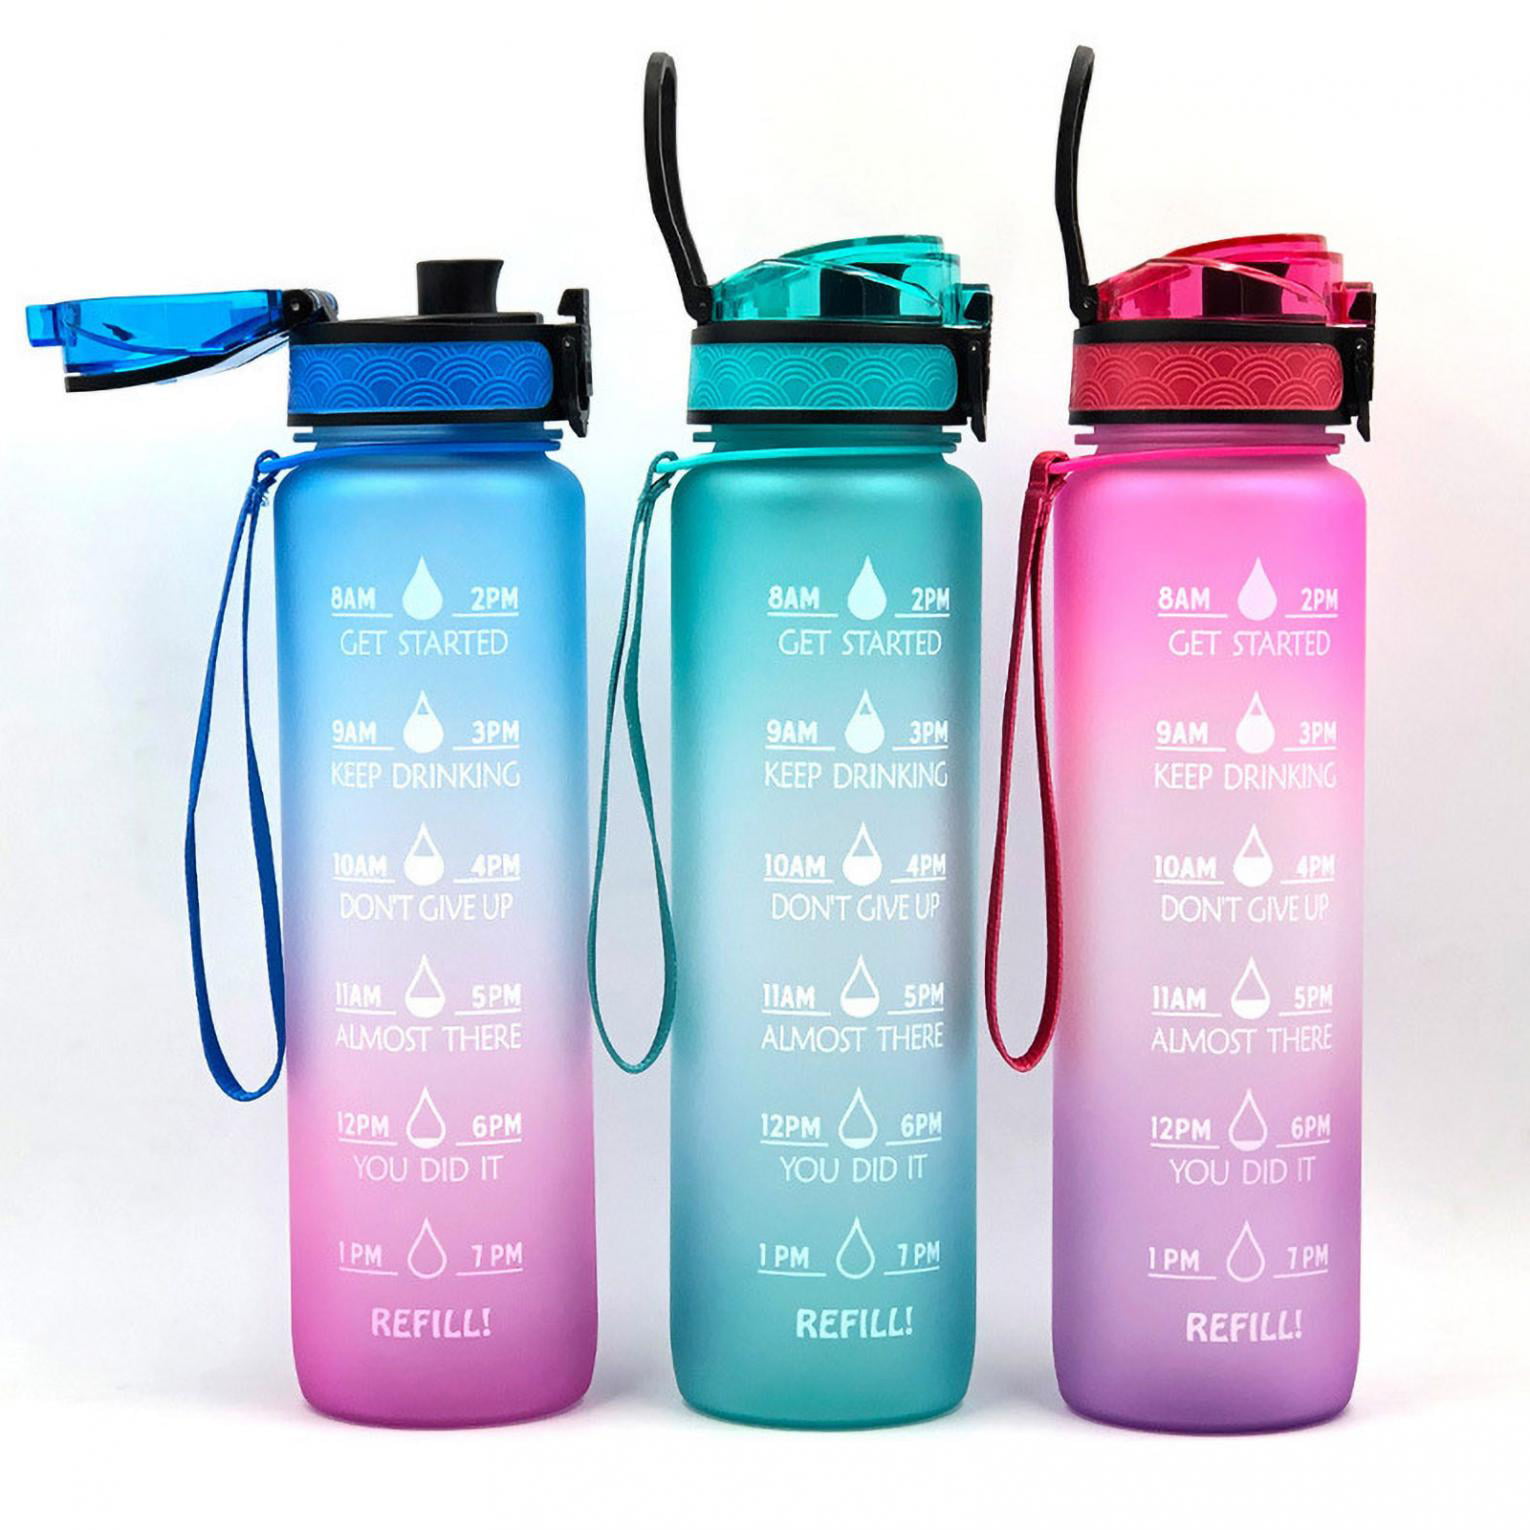 MIKAMEE 32 oz Water Bottles Time Marker & with Algeria